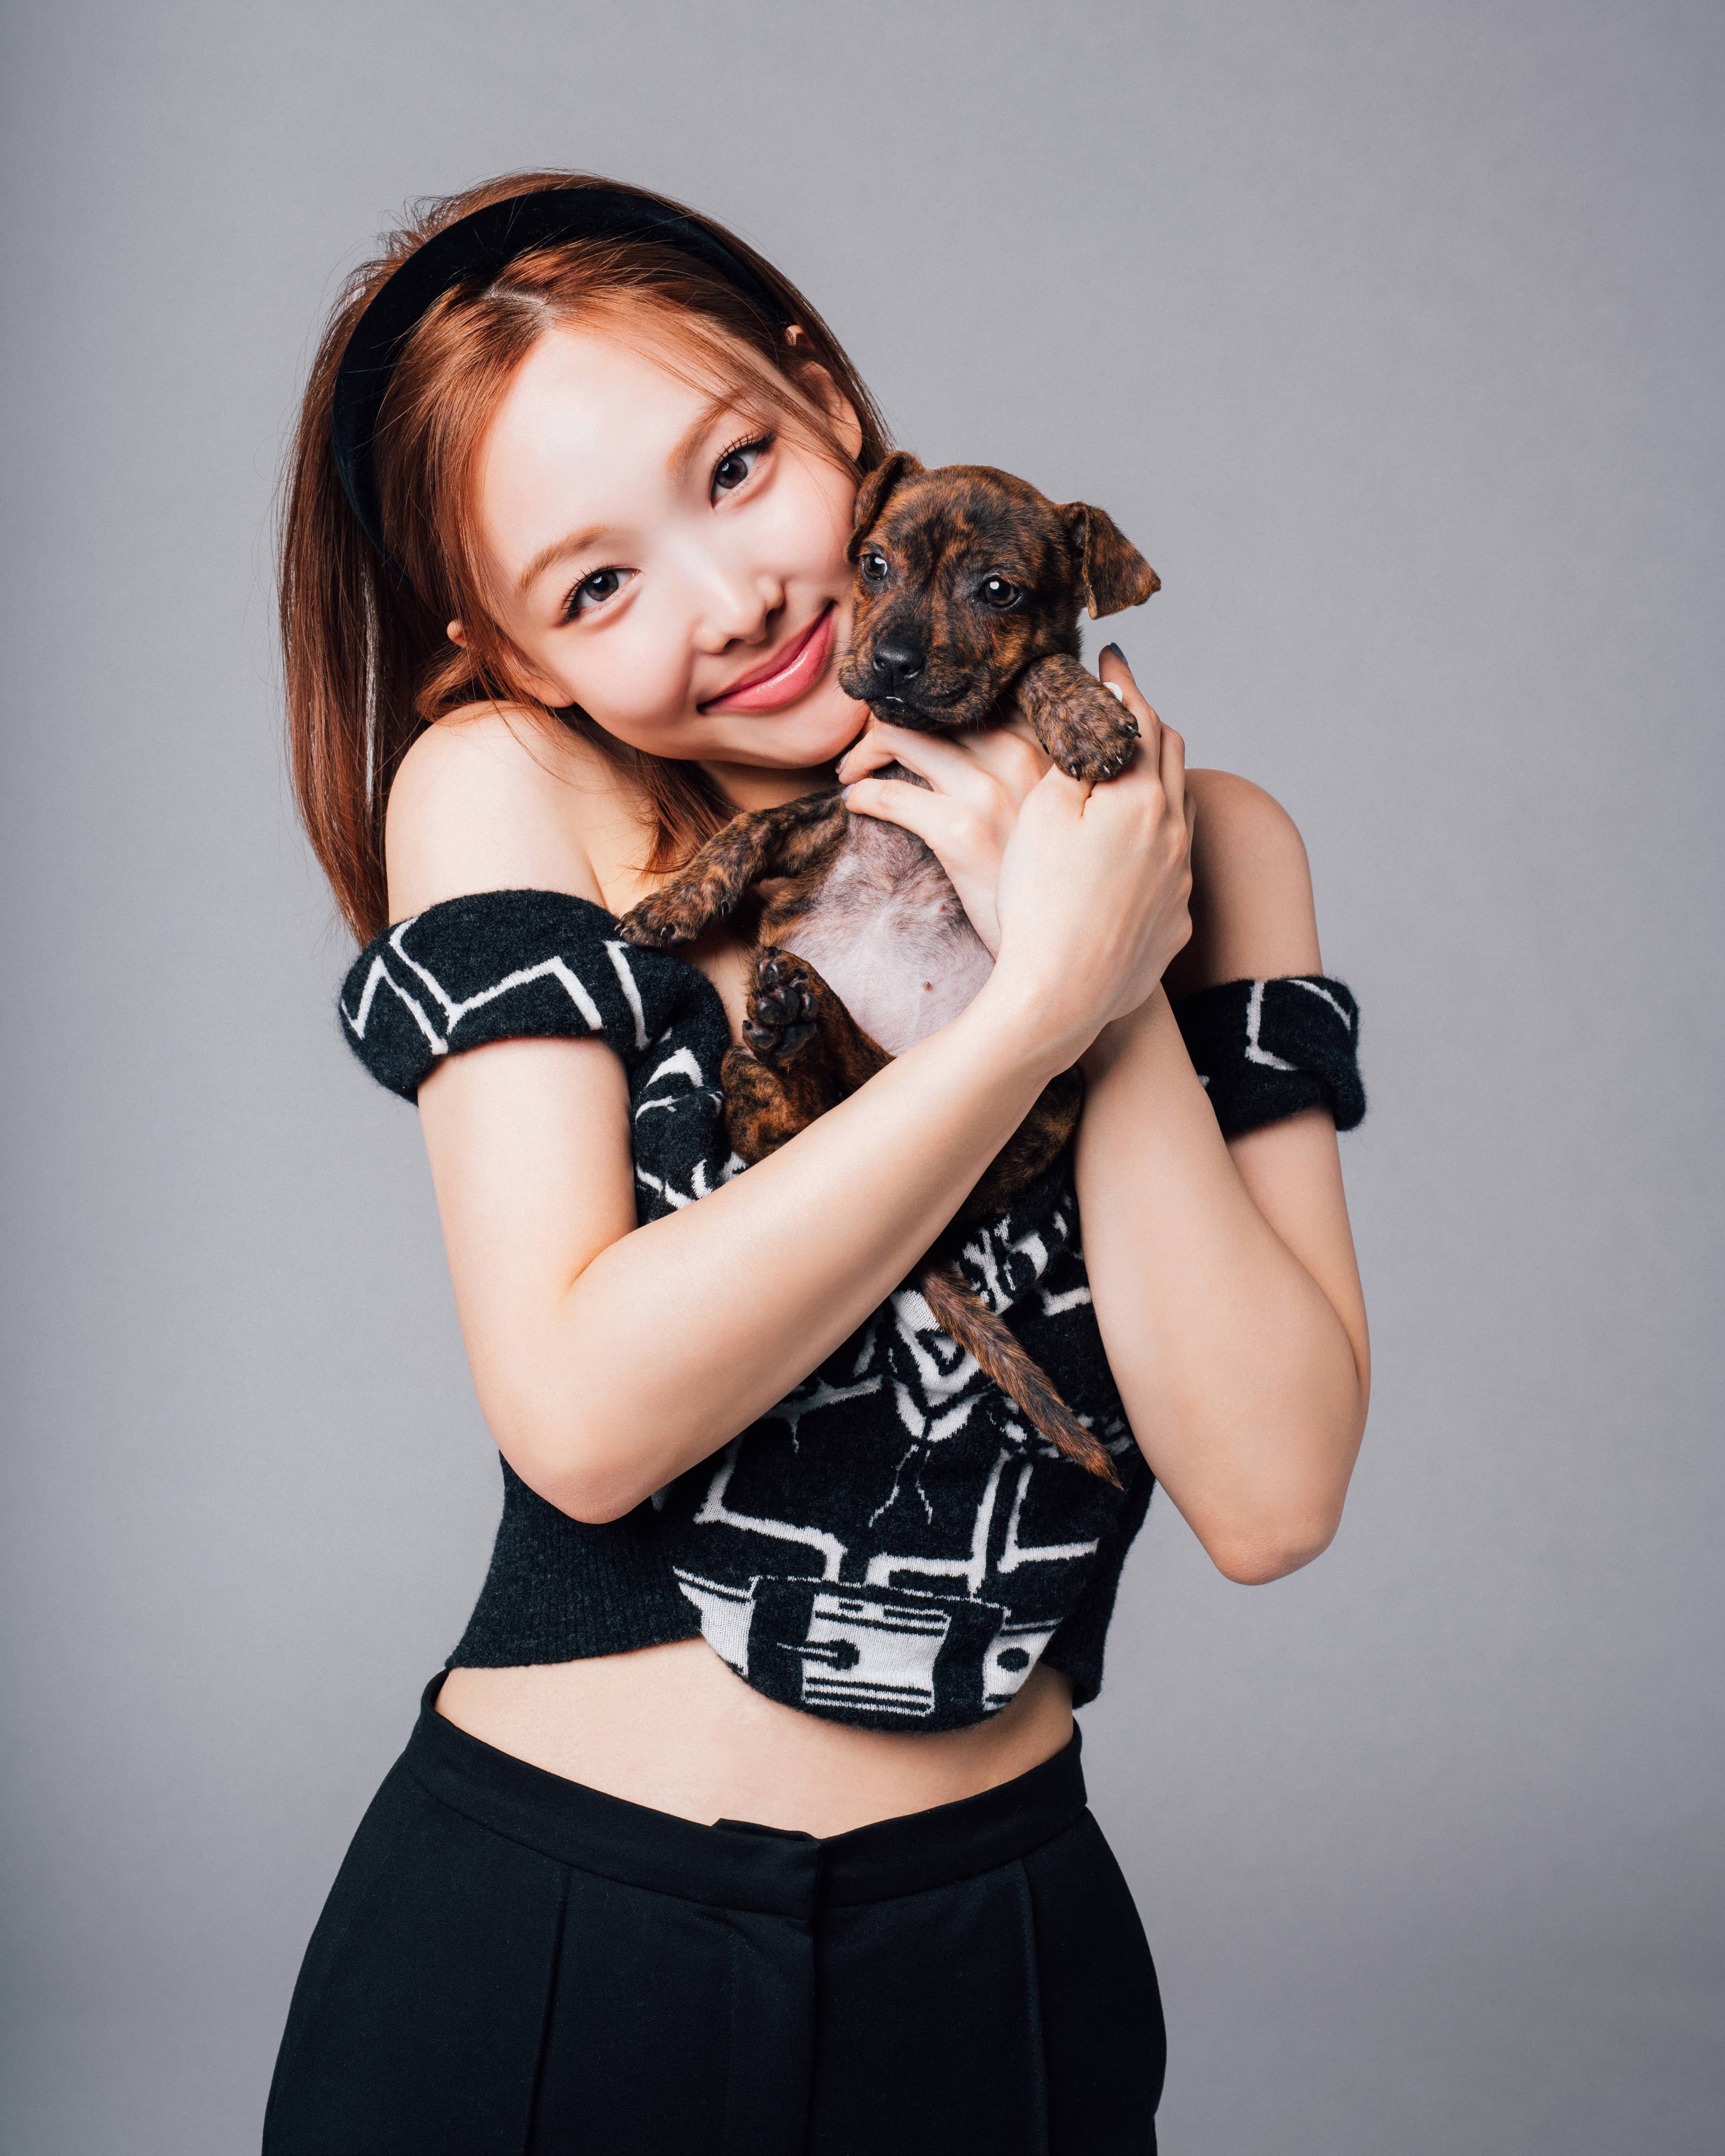 Young woman smiling, holding a small puppy, wearing a patterned top and high-waisted pants